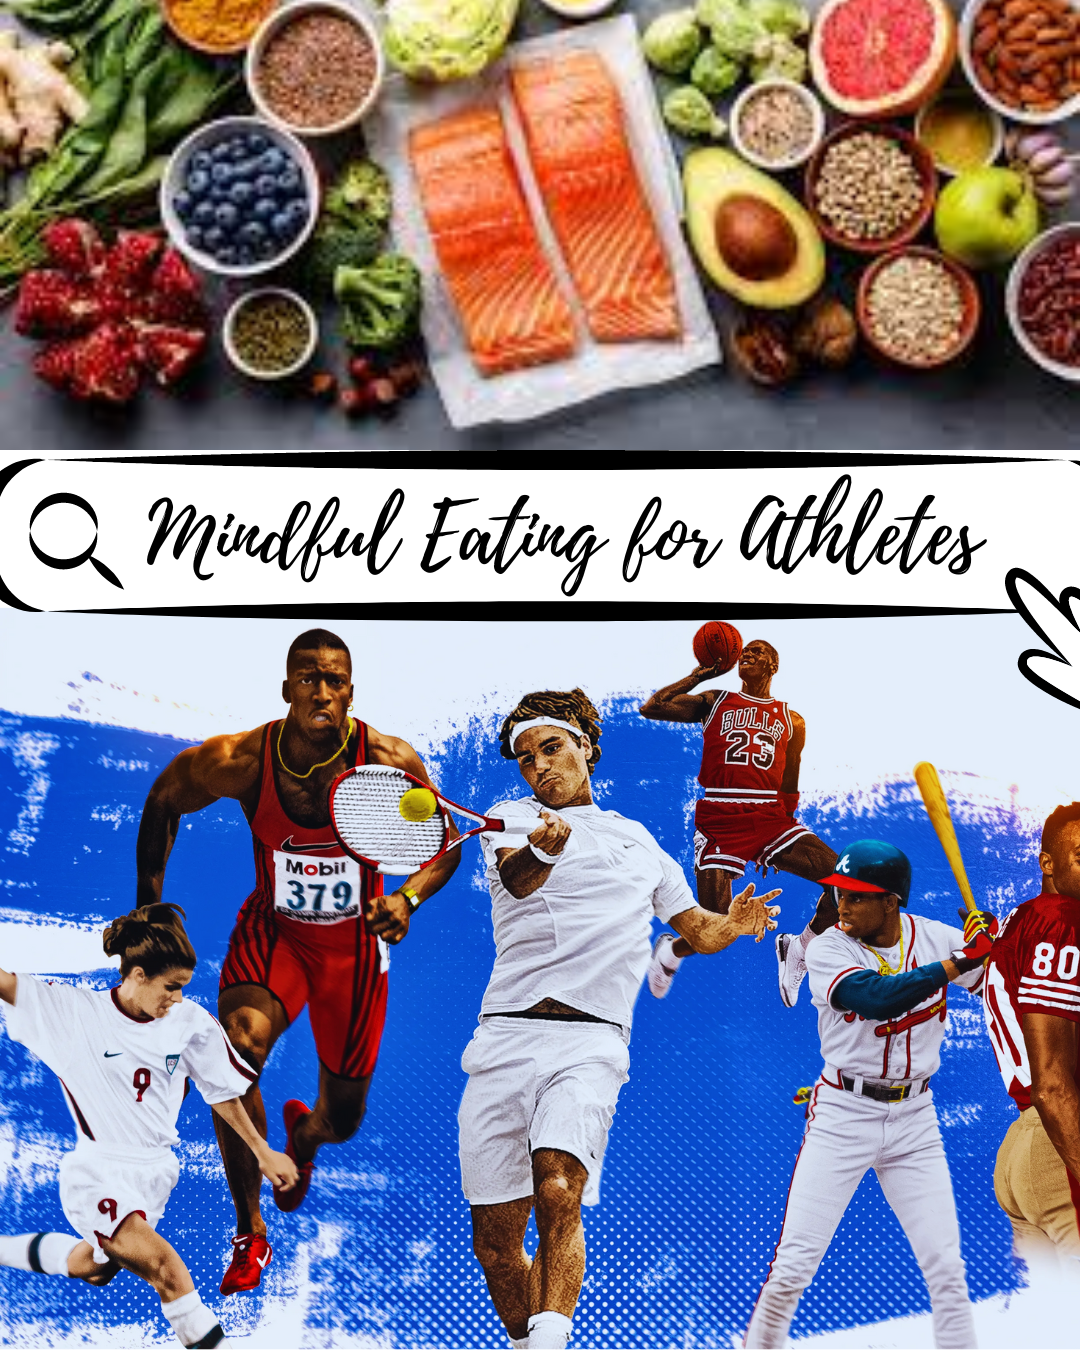 Mindful eating for athletes 